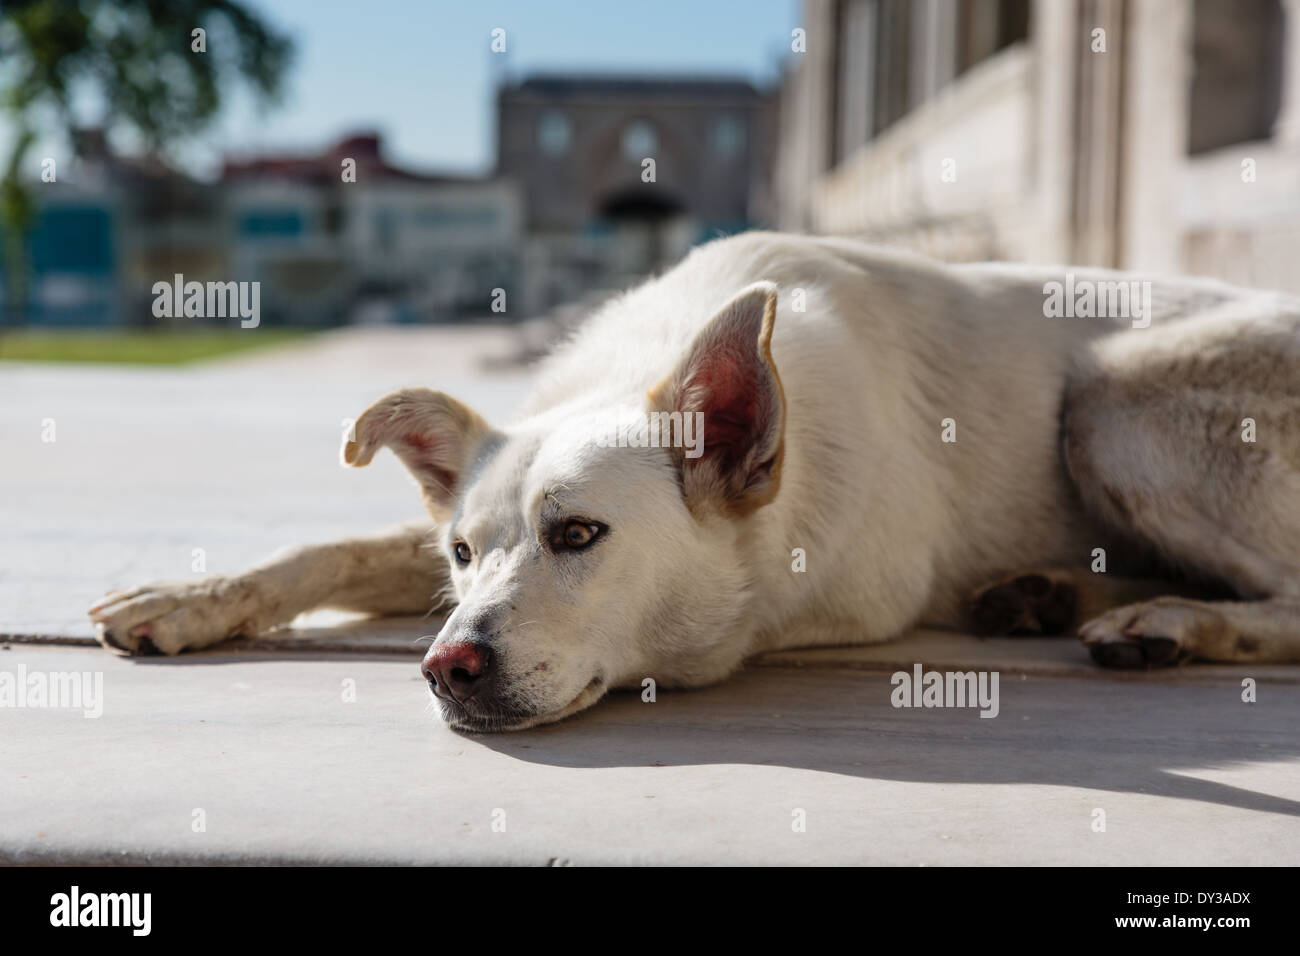 Sometimes controversial relationship to dog in Islamic culture Stock Photo